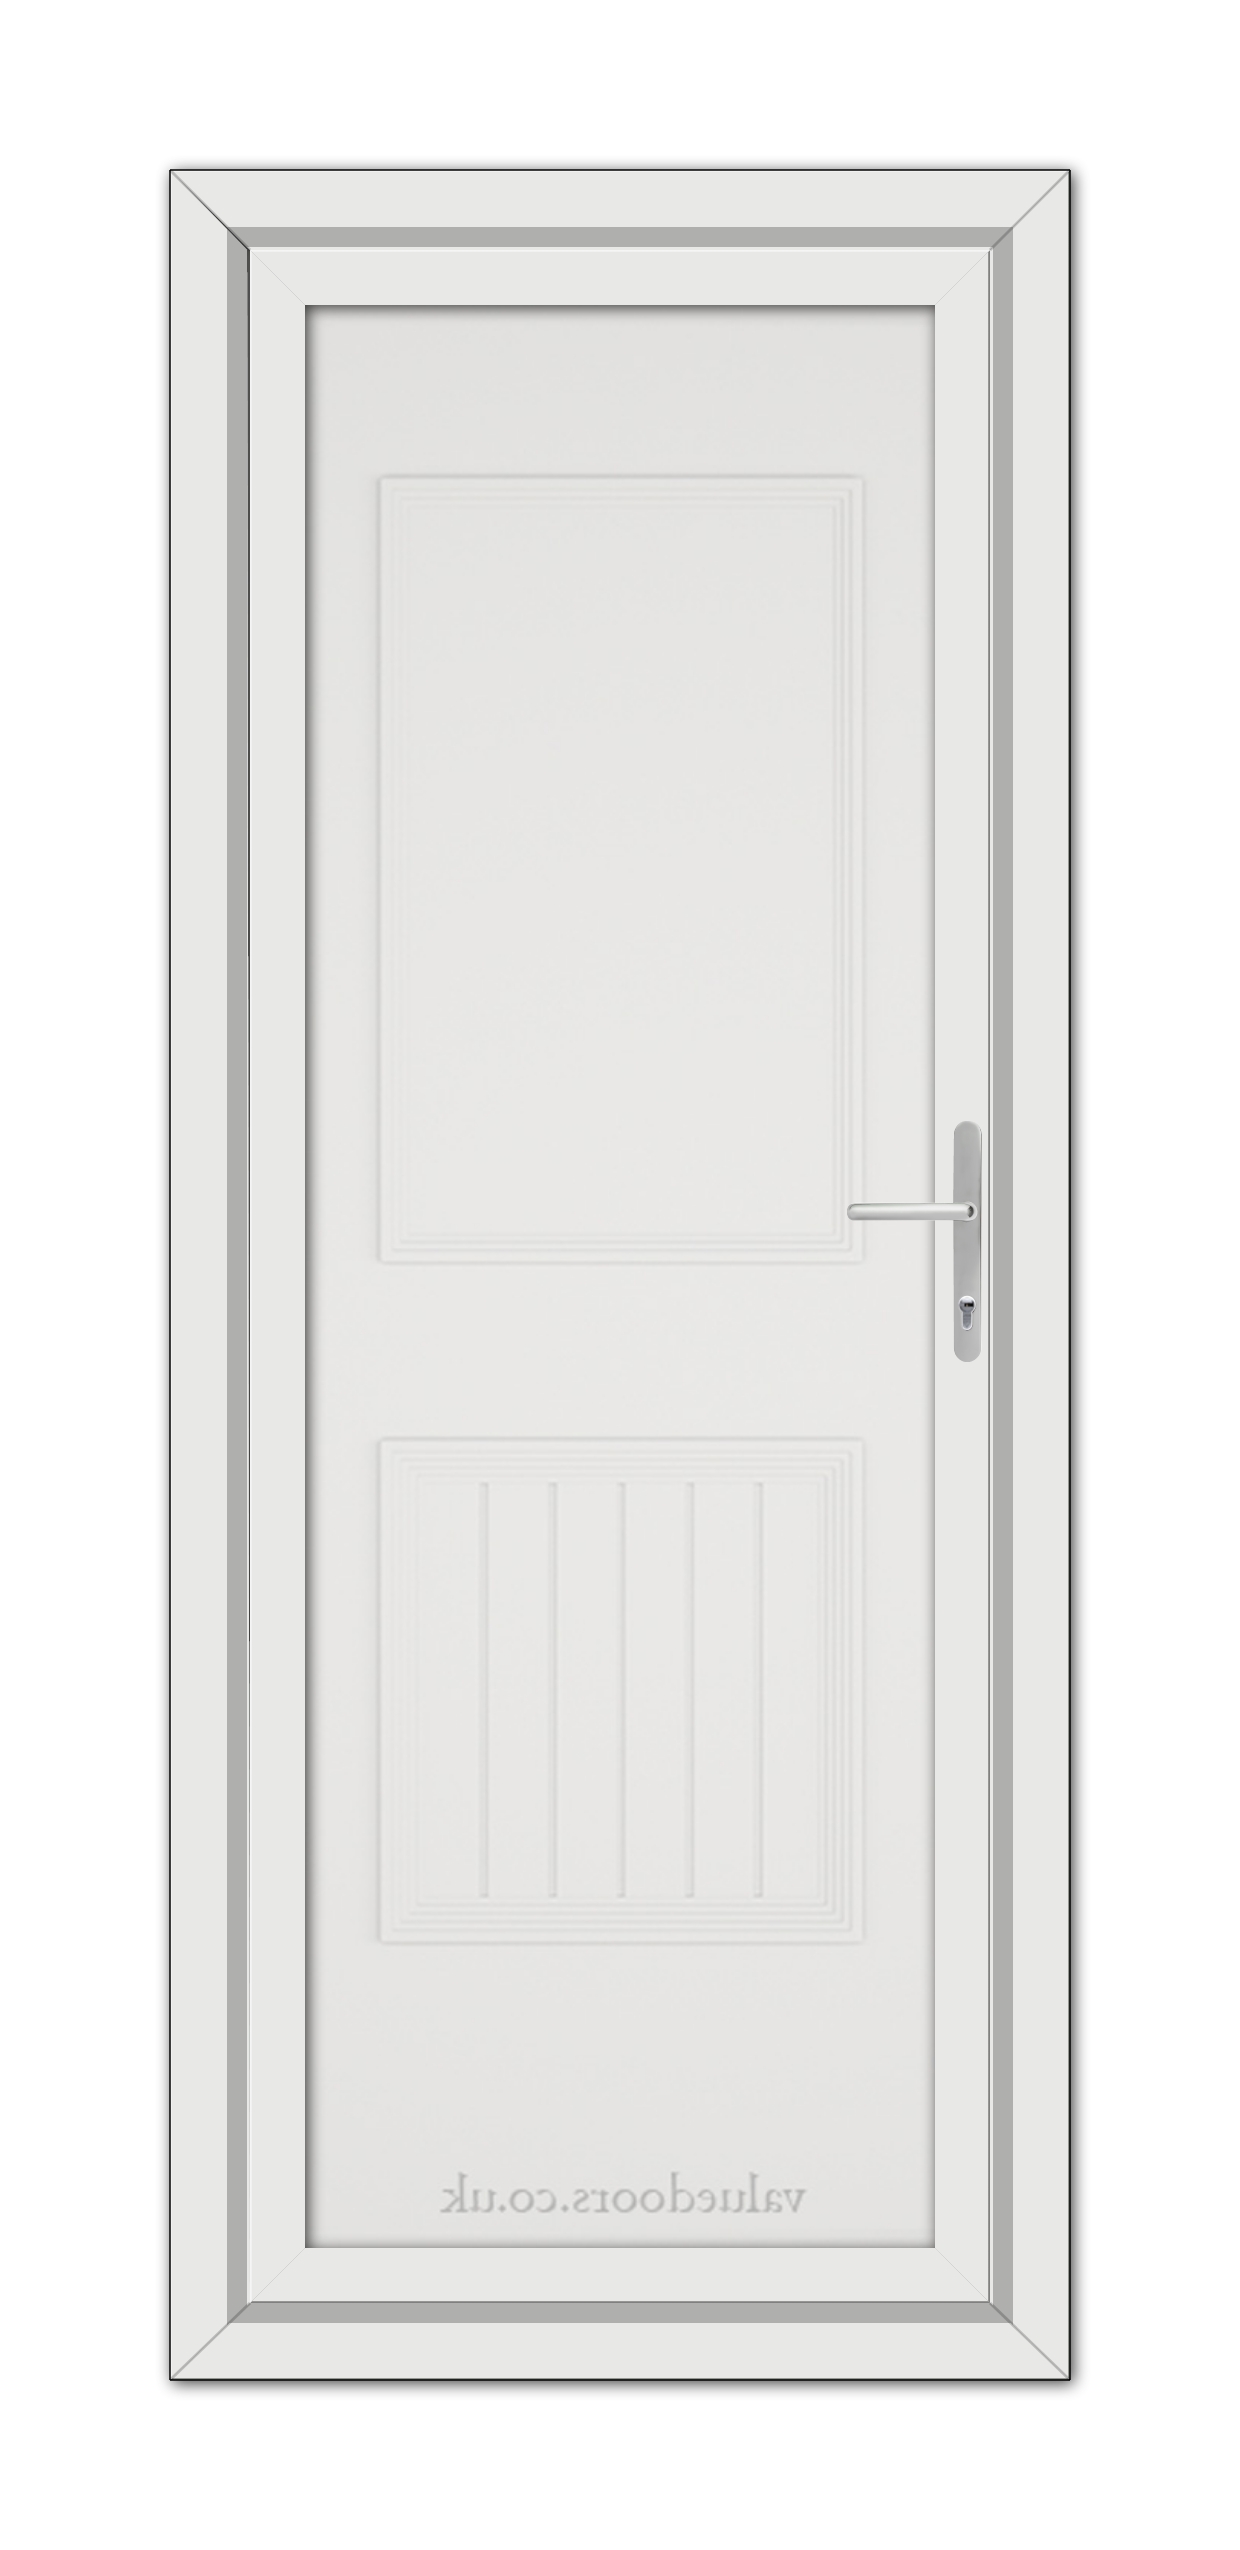 A vertical image of a White Alnwick One Solid uPVC Door with a silver handle, set within a white frame, viewed from the front.